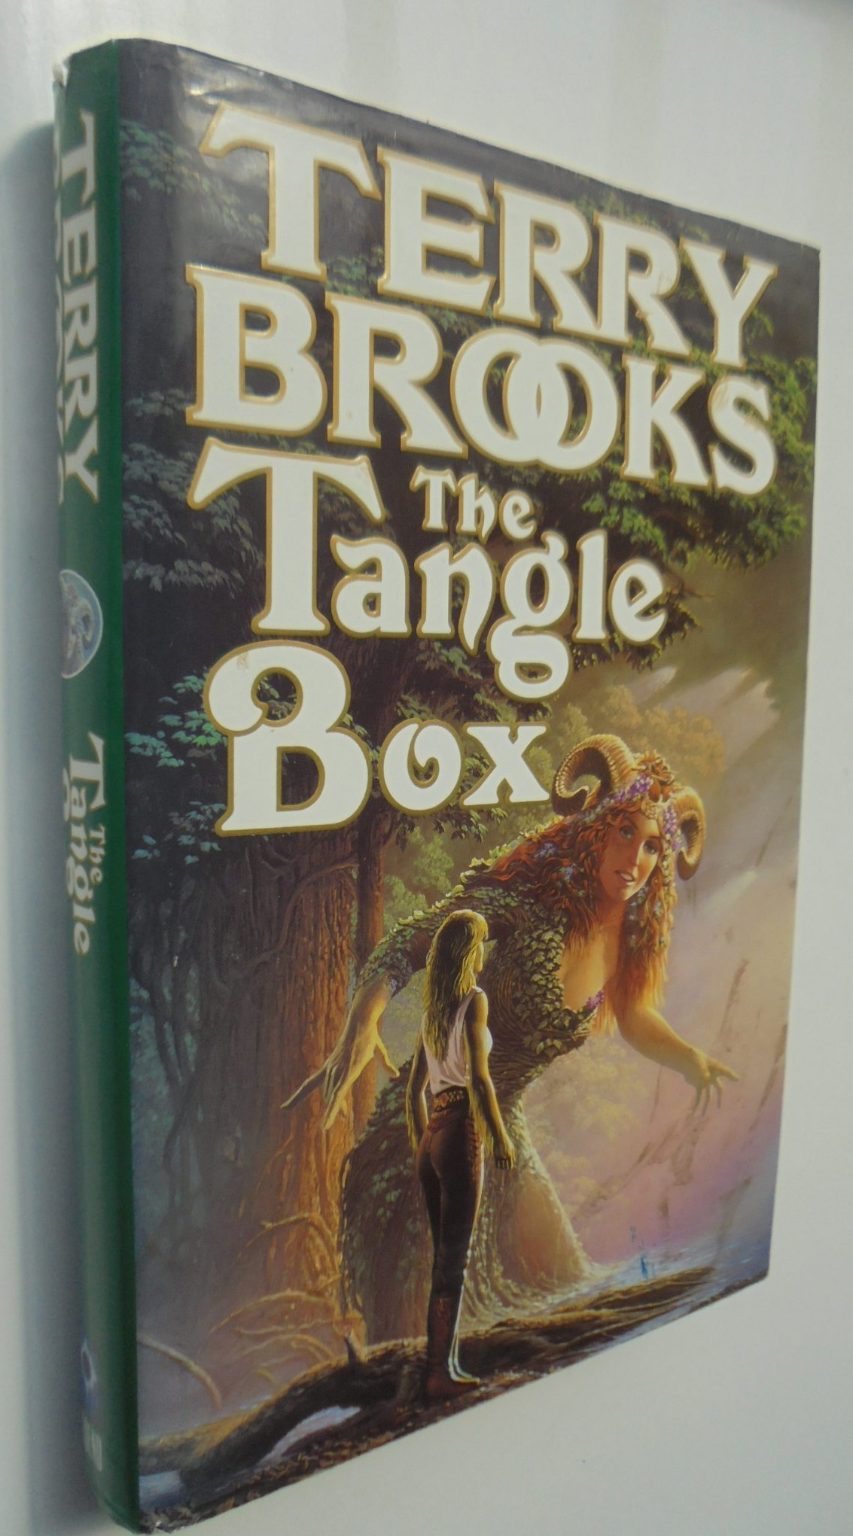 The Tangle Box, First Edition. By Terry Brooks